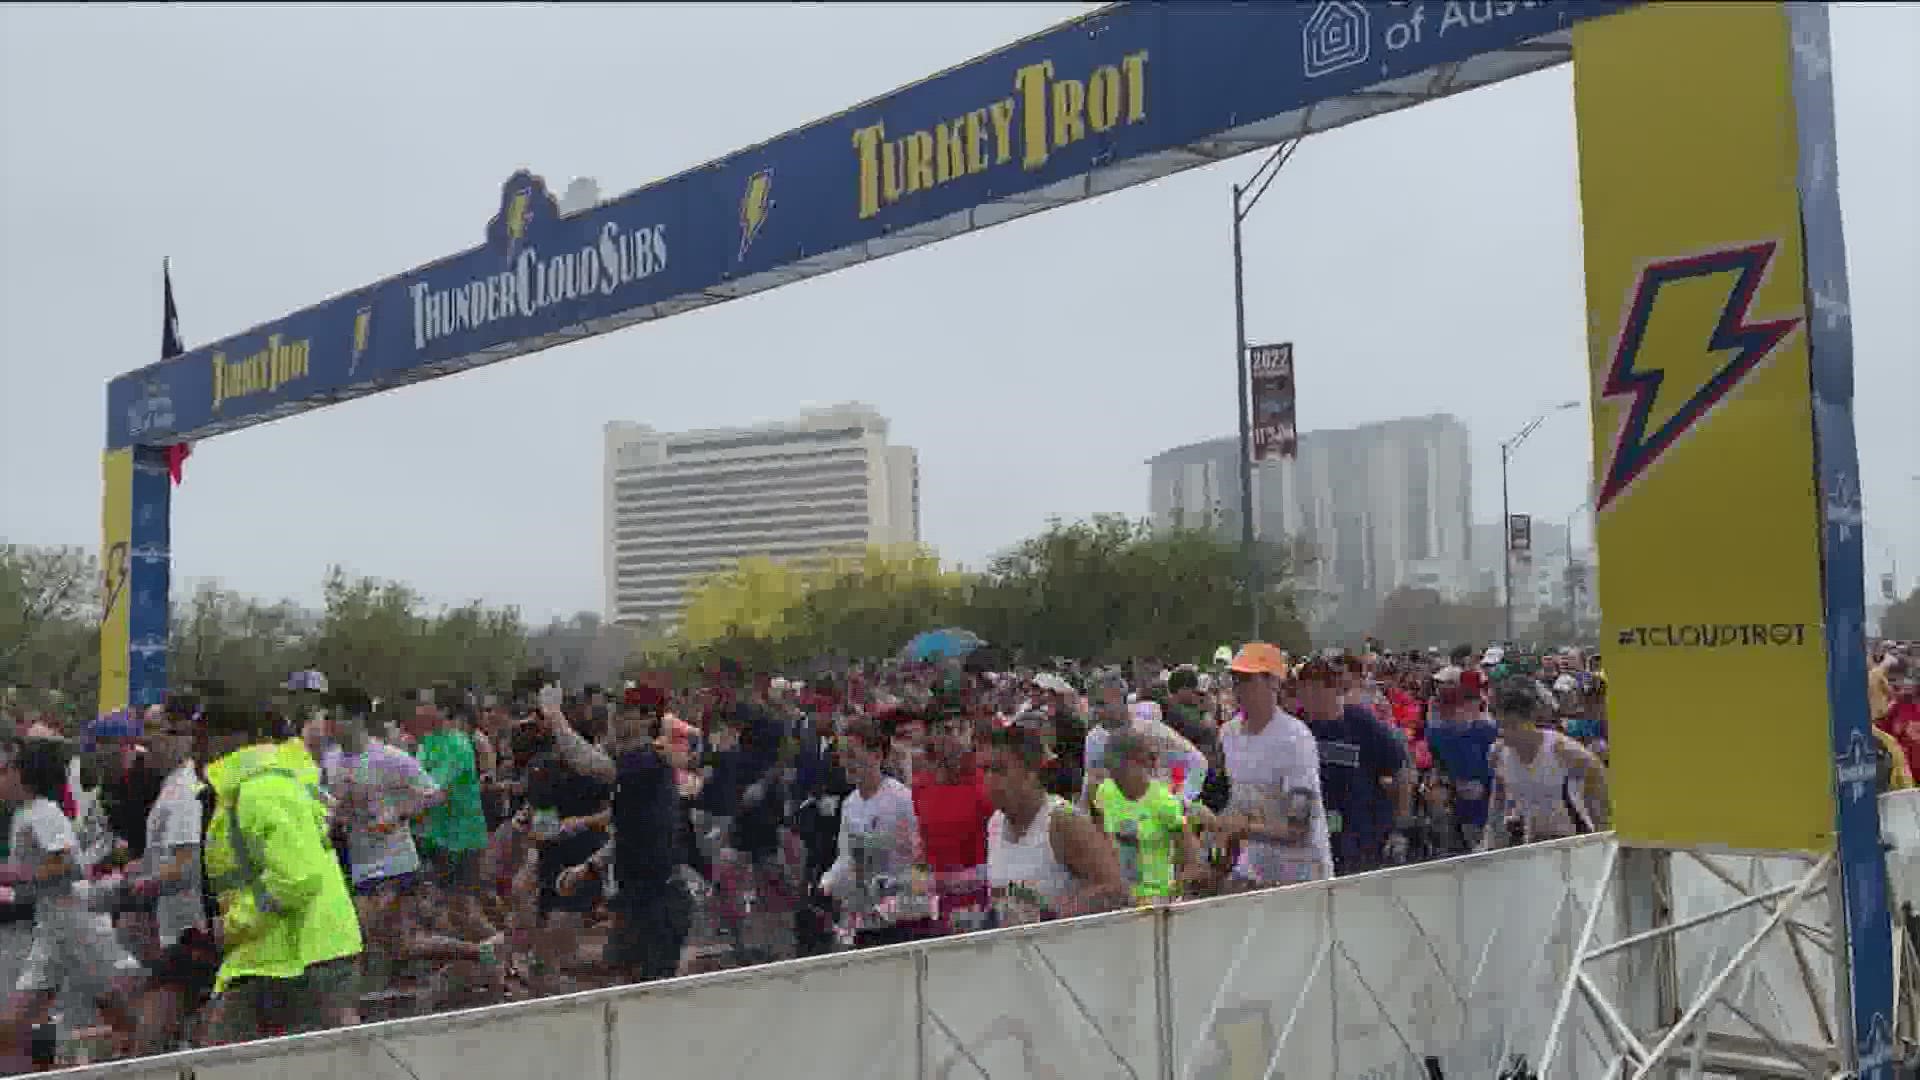 The event was set against the background of a rainy sky, but runners were still full of excitement and energy.